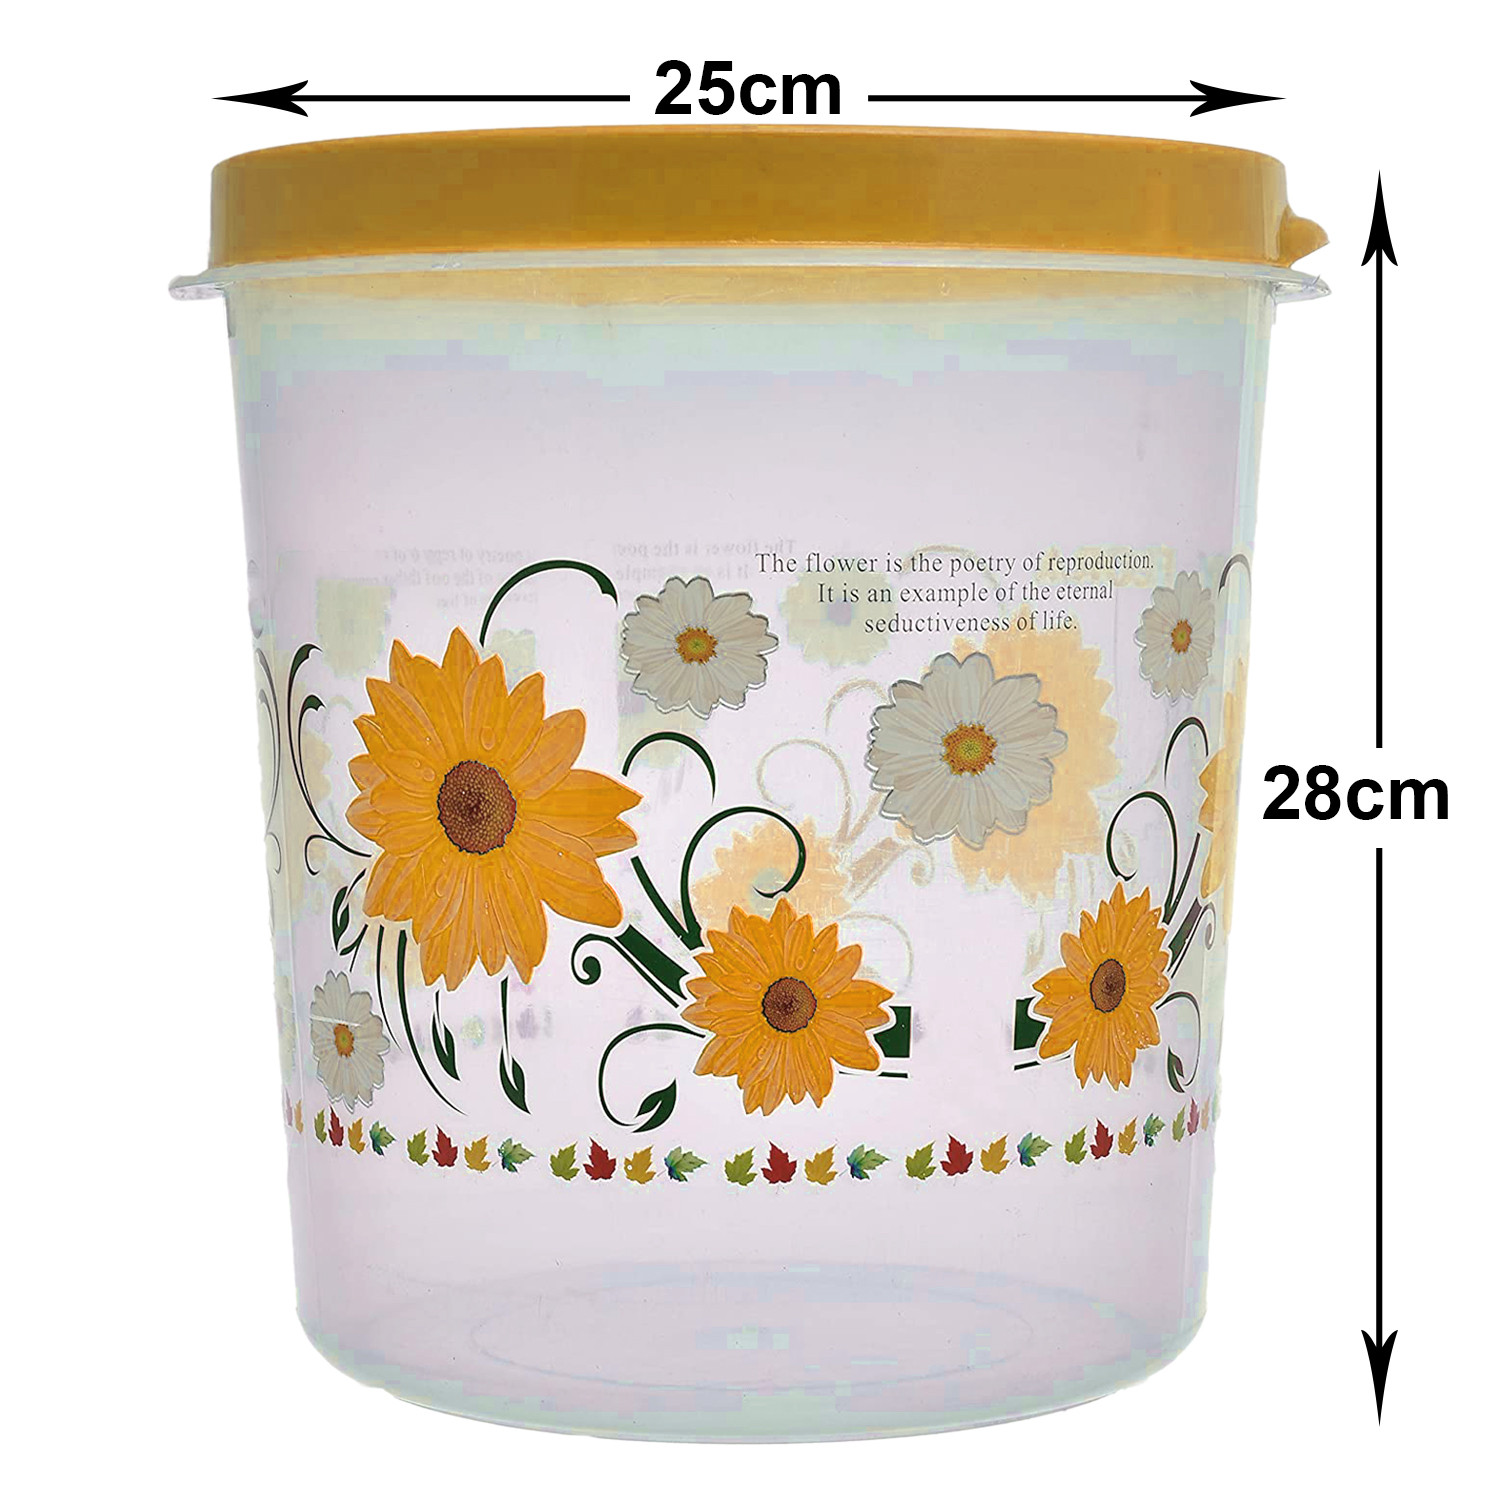 Kuber Industries Storage Container|Durable Plastic Floral Design BPA Free Food Kitchen Organizer With Lid|Food Utility Jar, 10 Ltr (Yellow)